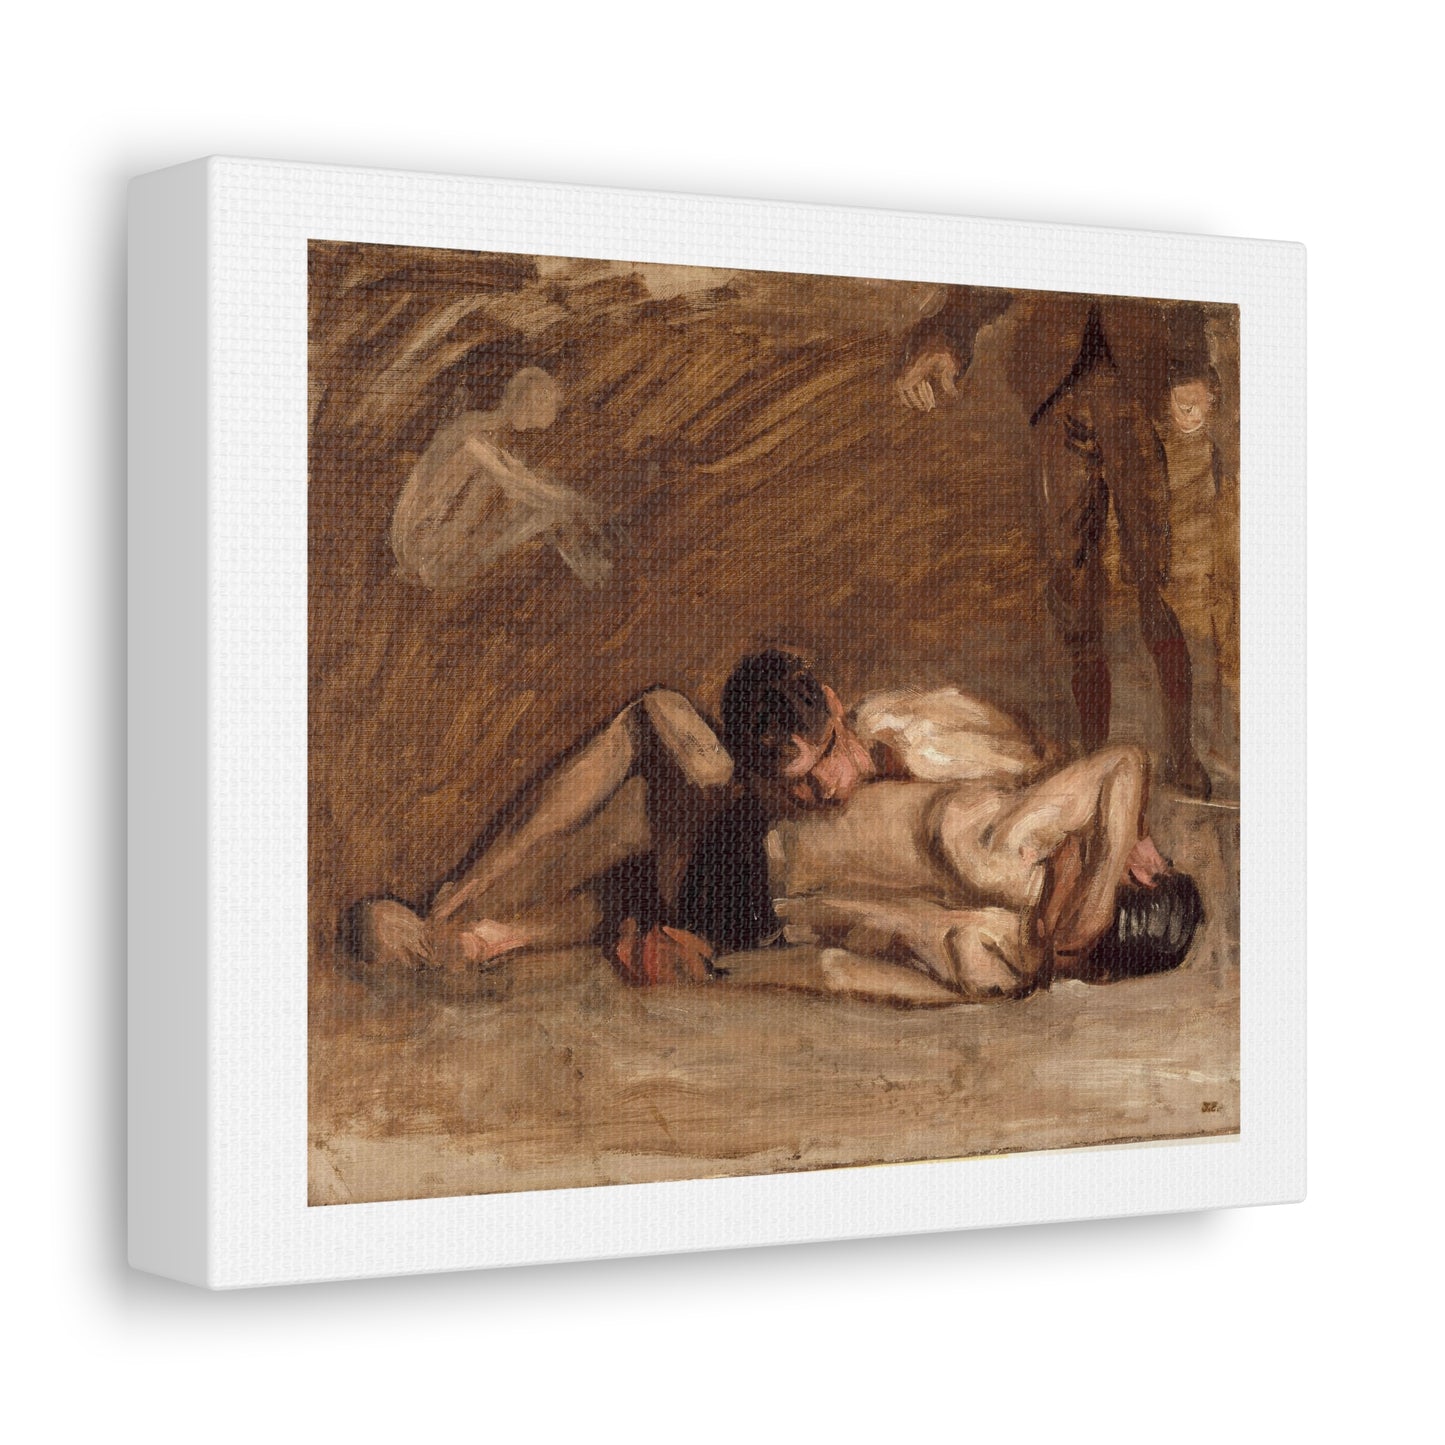 Wrestlers (1899) by Thomas Eakins, from the Original, Art Print on Canvas